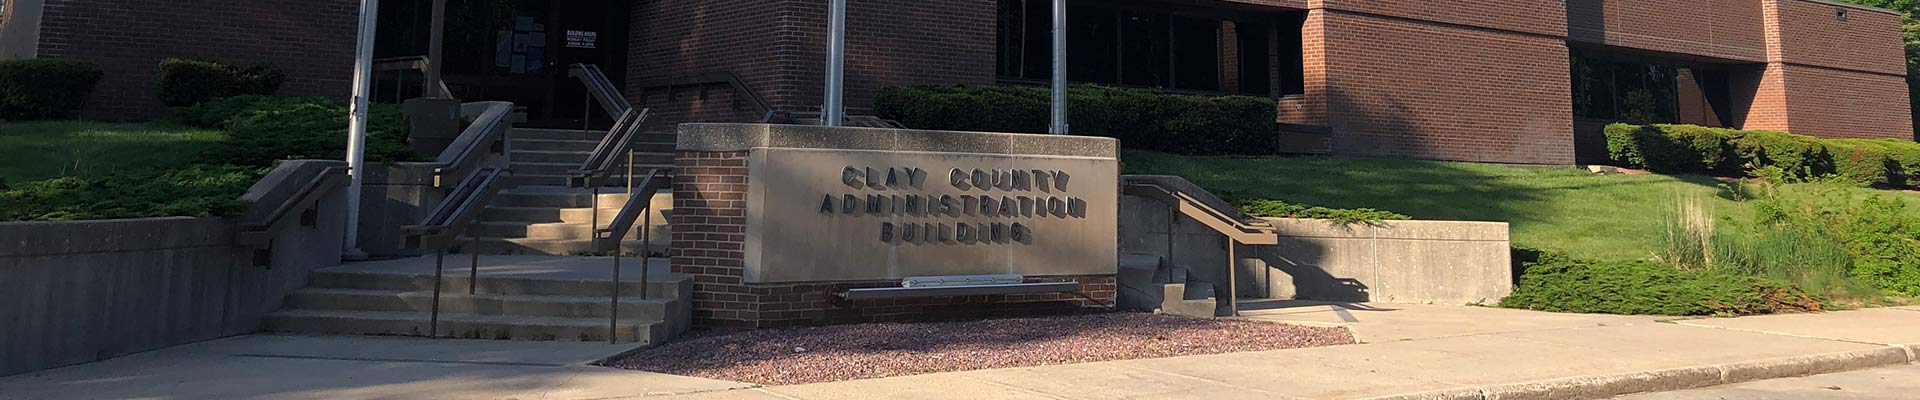 Image of Clay County Assessor Clay County Administration Building